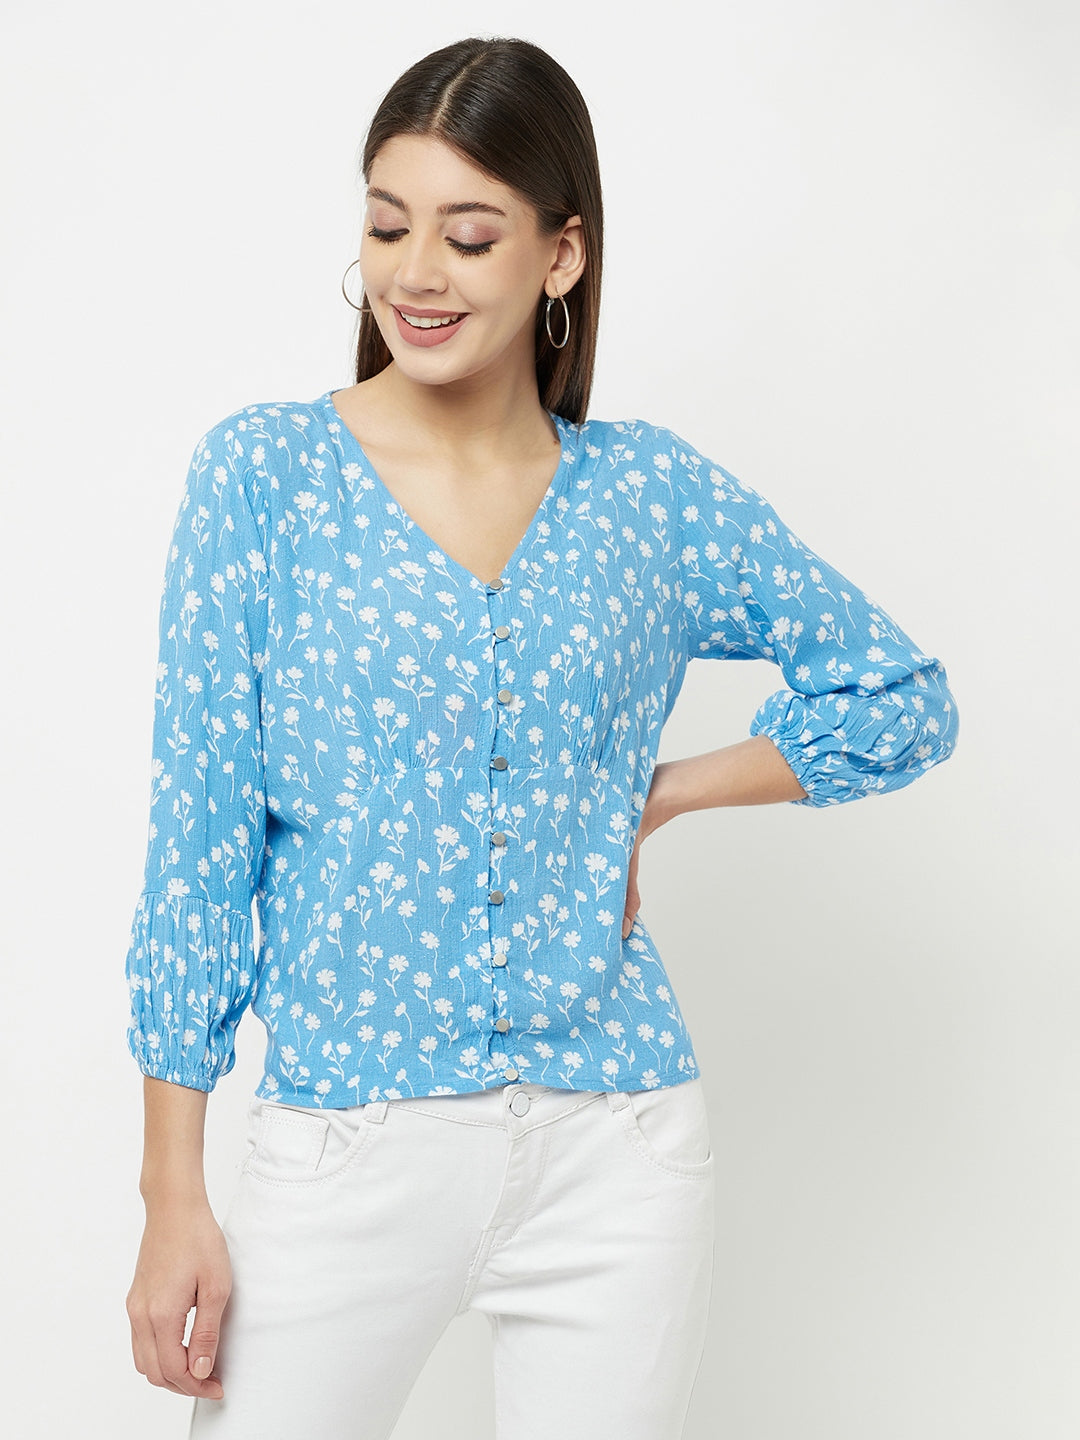 Blue Floral Printed V-Neck Cropped Top - Women Tops